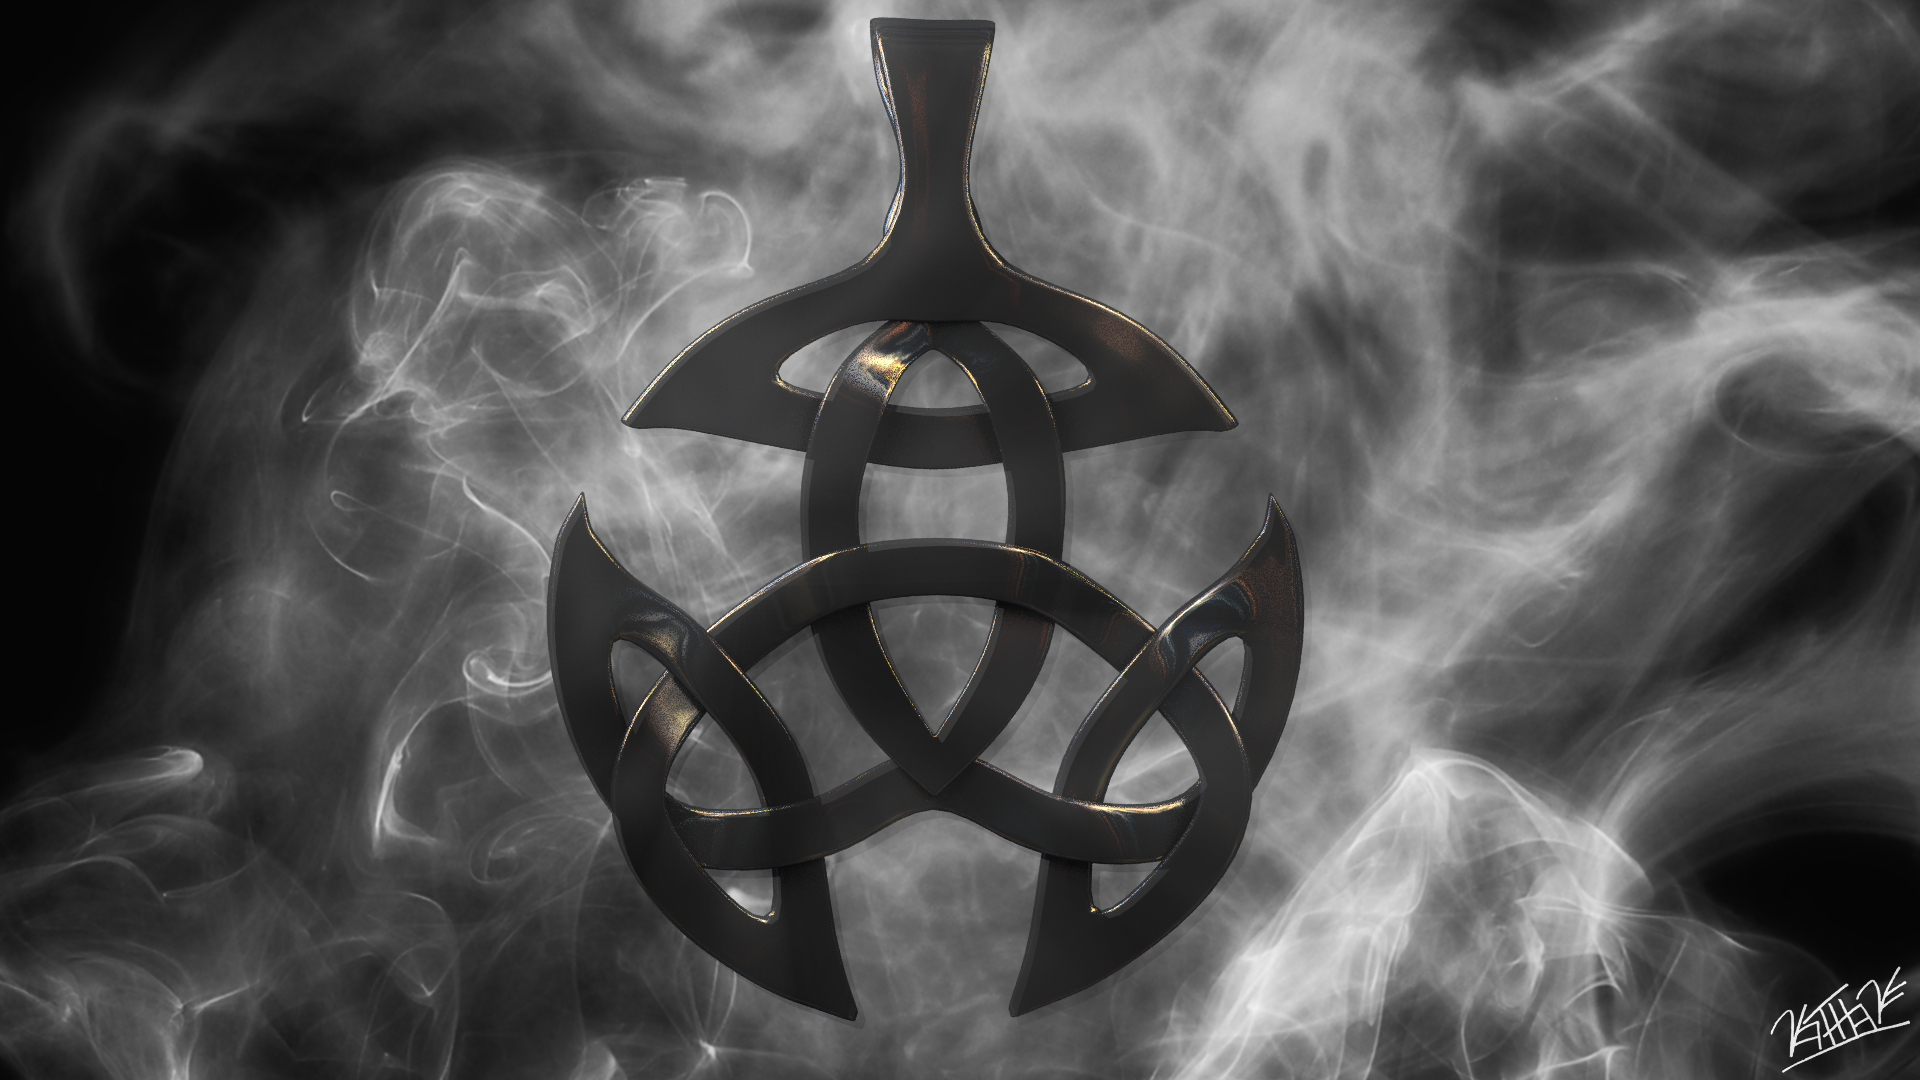 This symbol looked pretty cool so I decided to model it and it turned out really well!